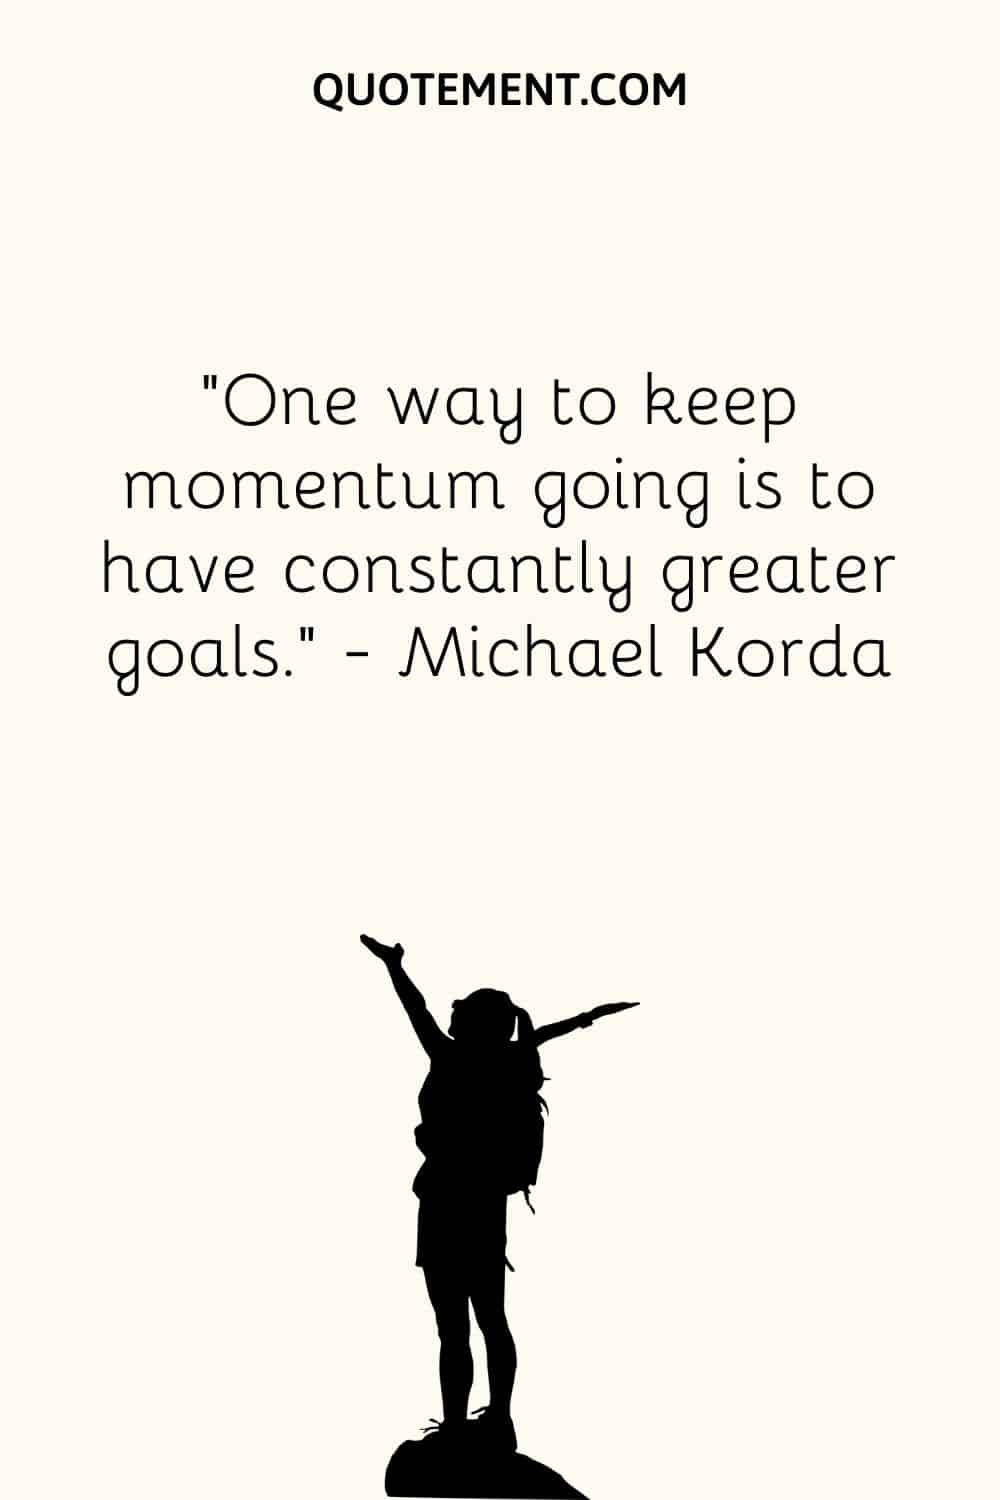 One way to keep momentum going is to have constantly greater goals